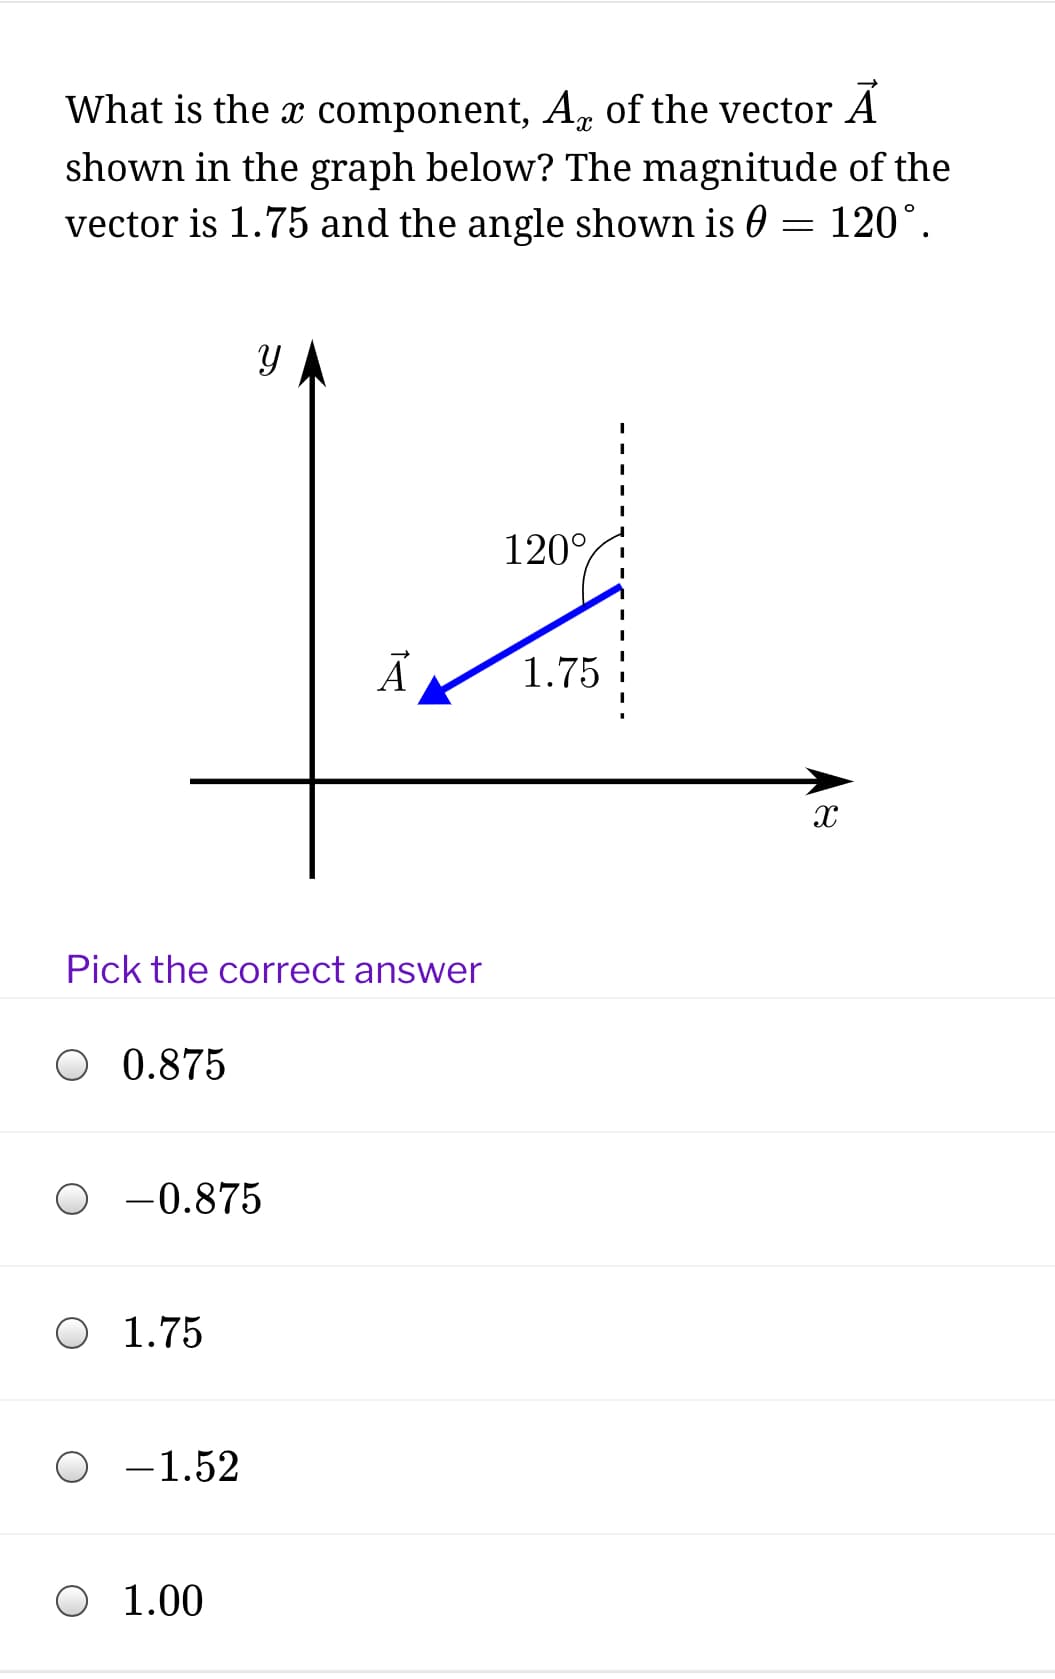 What is the x component, A, of the vector A
shown in the graph below? The magnitude of the
vector is 1.75 and the angle shown is 0 = 120°.
120°,
1.75
Pick the correct answer
O 0.875
O -0.875
O 1.75
O -1.52
1.00
